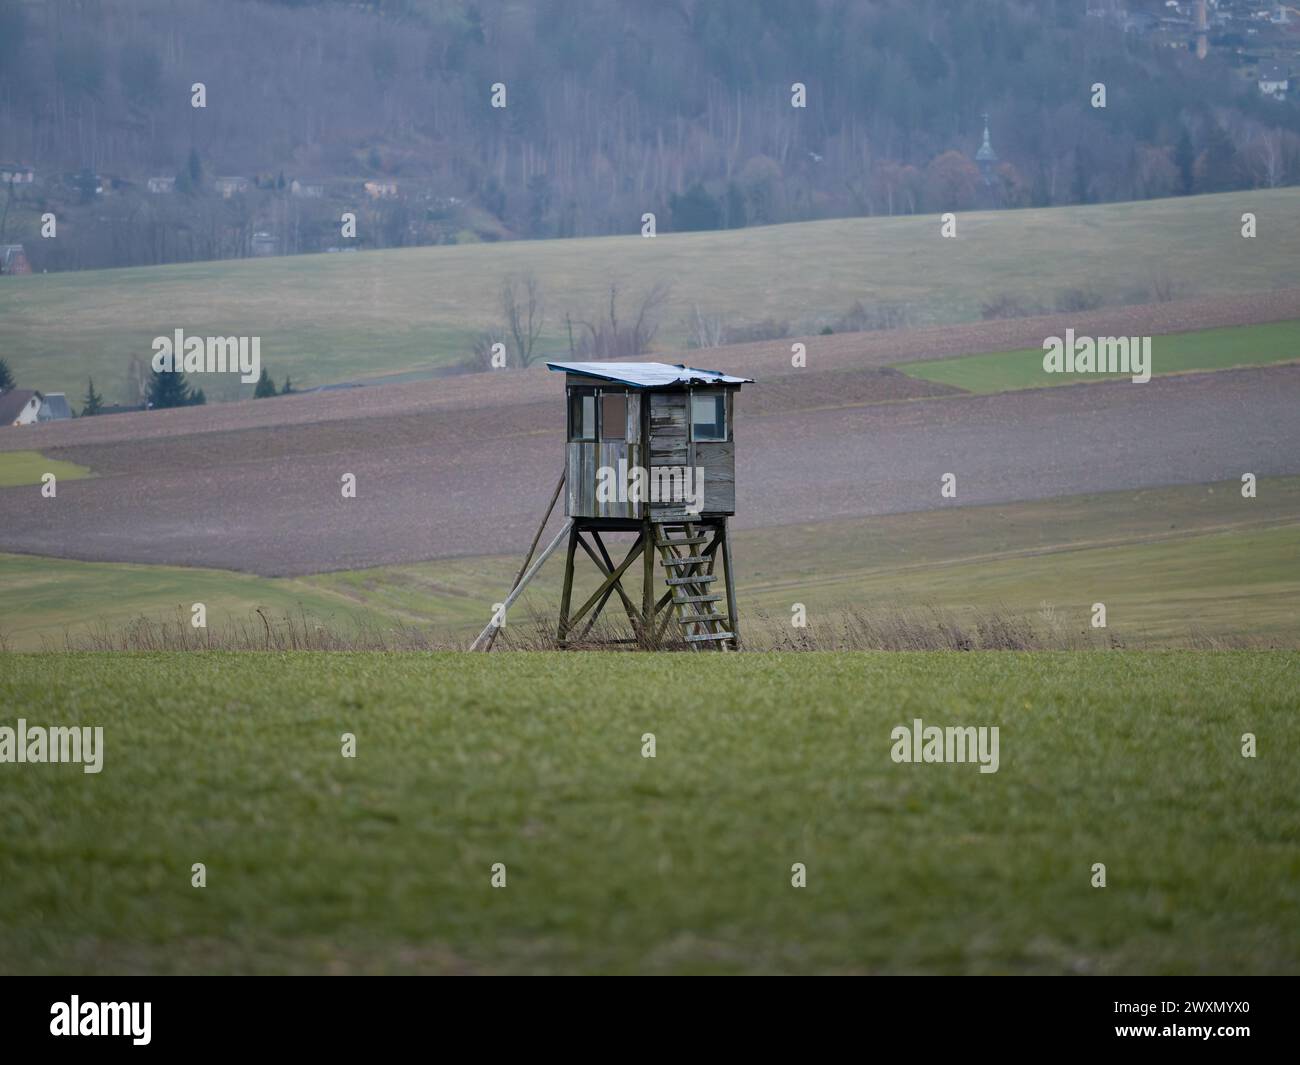 Hunting stand or high seat for hunters in a rural landscape with agricultural fields. Wooden cabin for people to hide and shoot at animals. Stock Photo